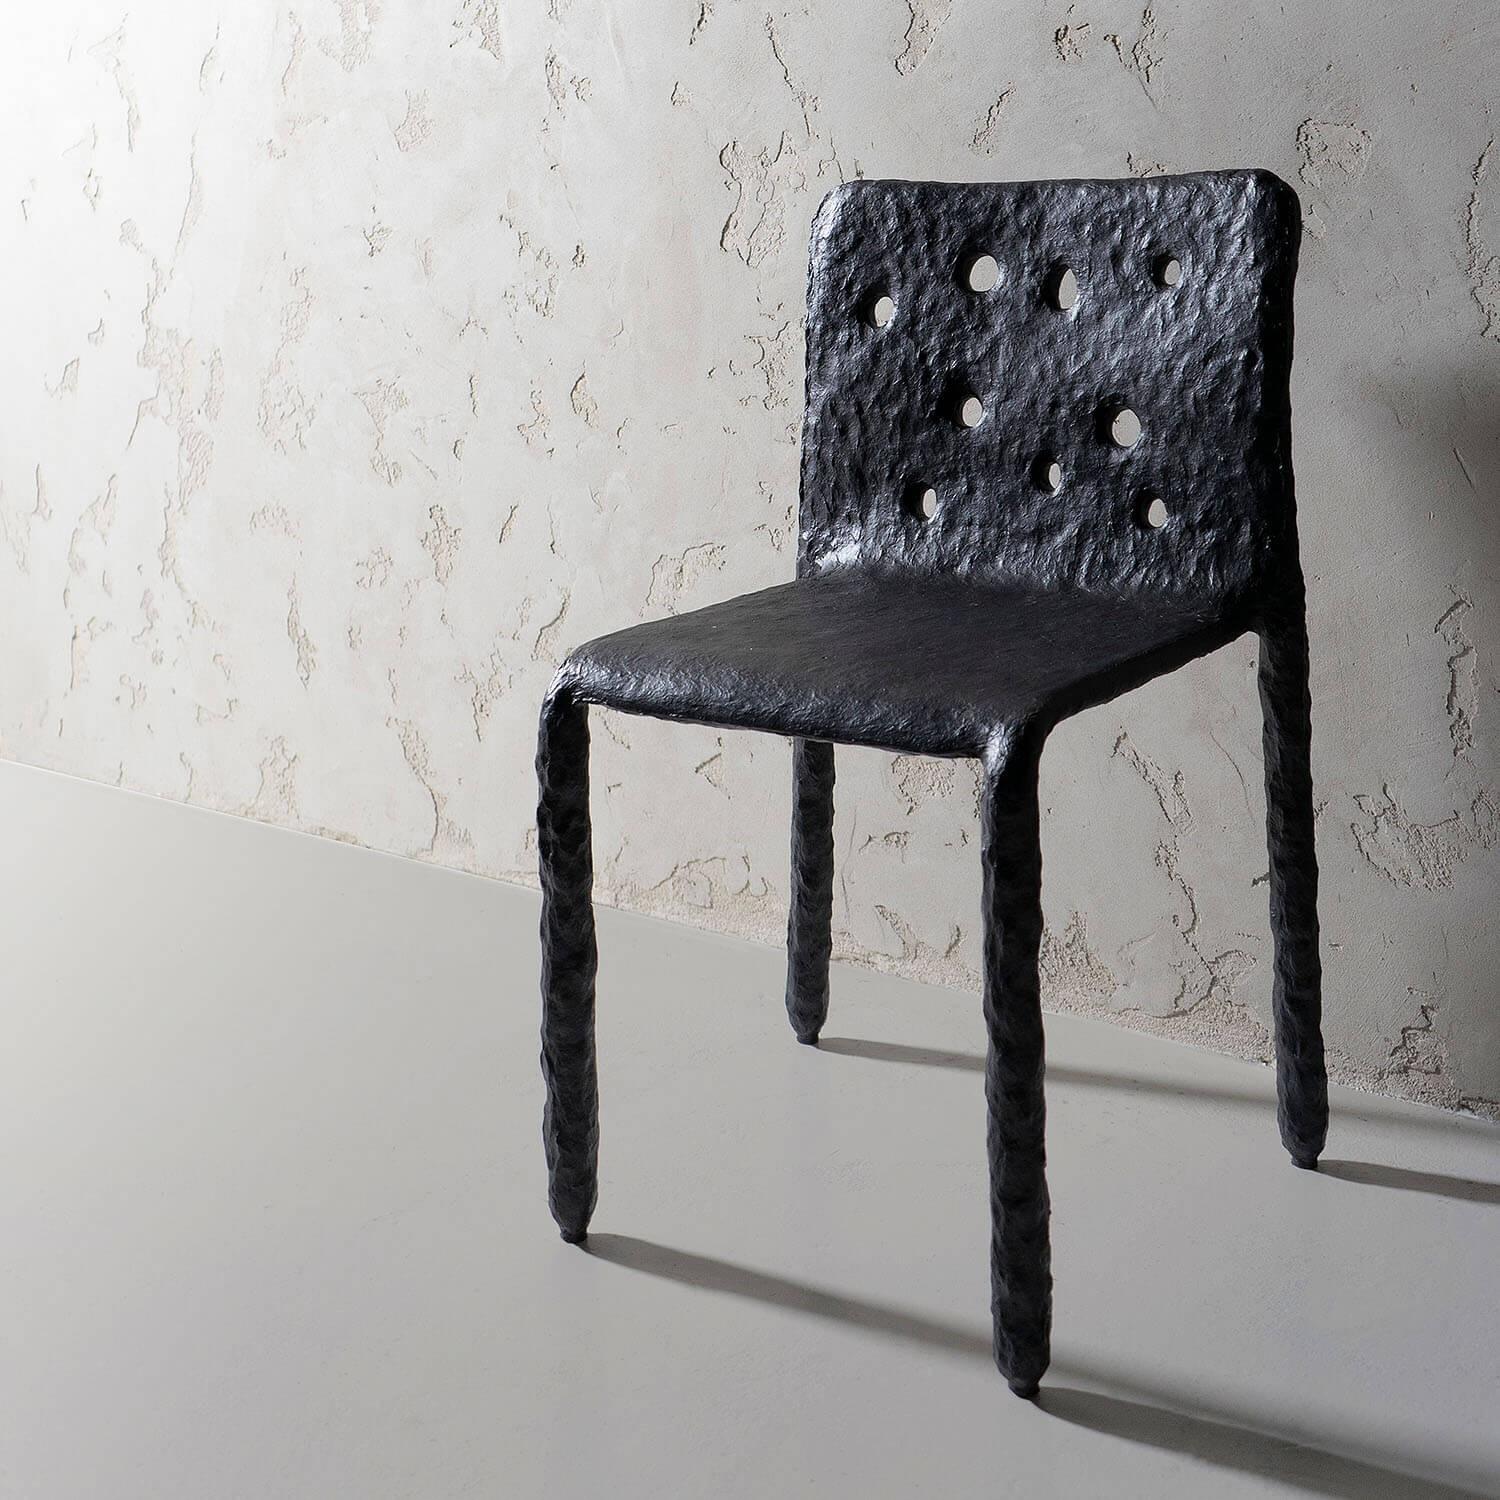 Sculpted Indoor Contemporary Chair by FAINA
Design: Victoria Yakusha
Material: steel, flax rubber, biopolymer, cellulose
Dimensions: Height: 82 x width 48 x legs depth 45 cm
Weight: 12 kilos.
(Also available in longer version 240 cm